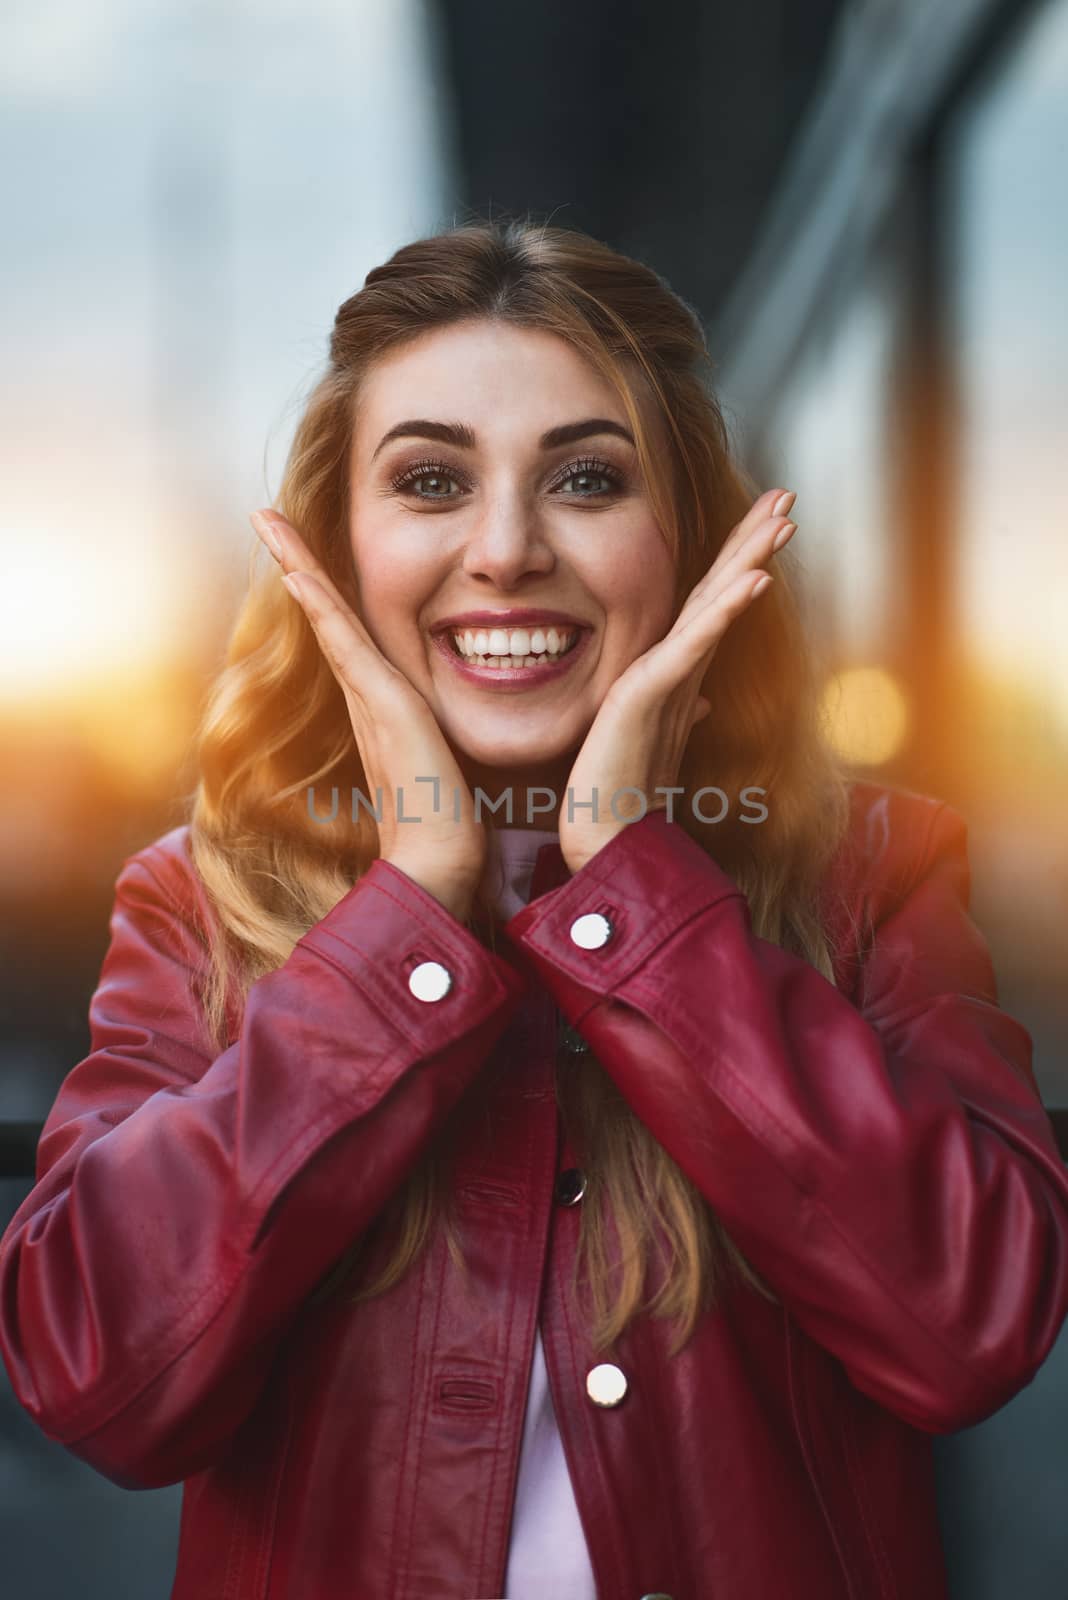 Close up portrait of a beautiful smiling girl with nice teeth having fun at street. by Nickstock